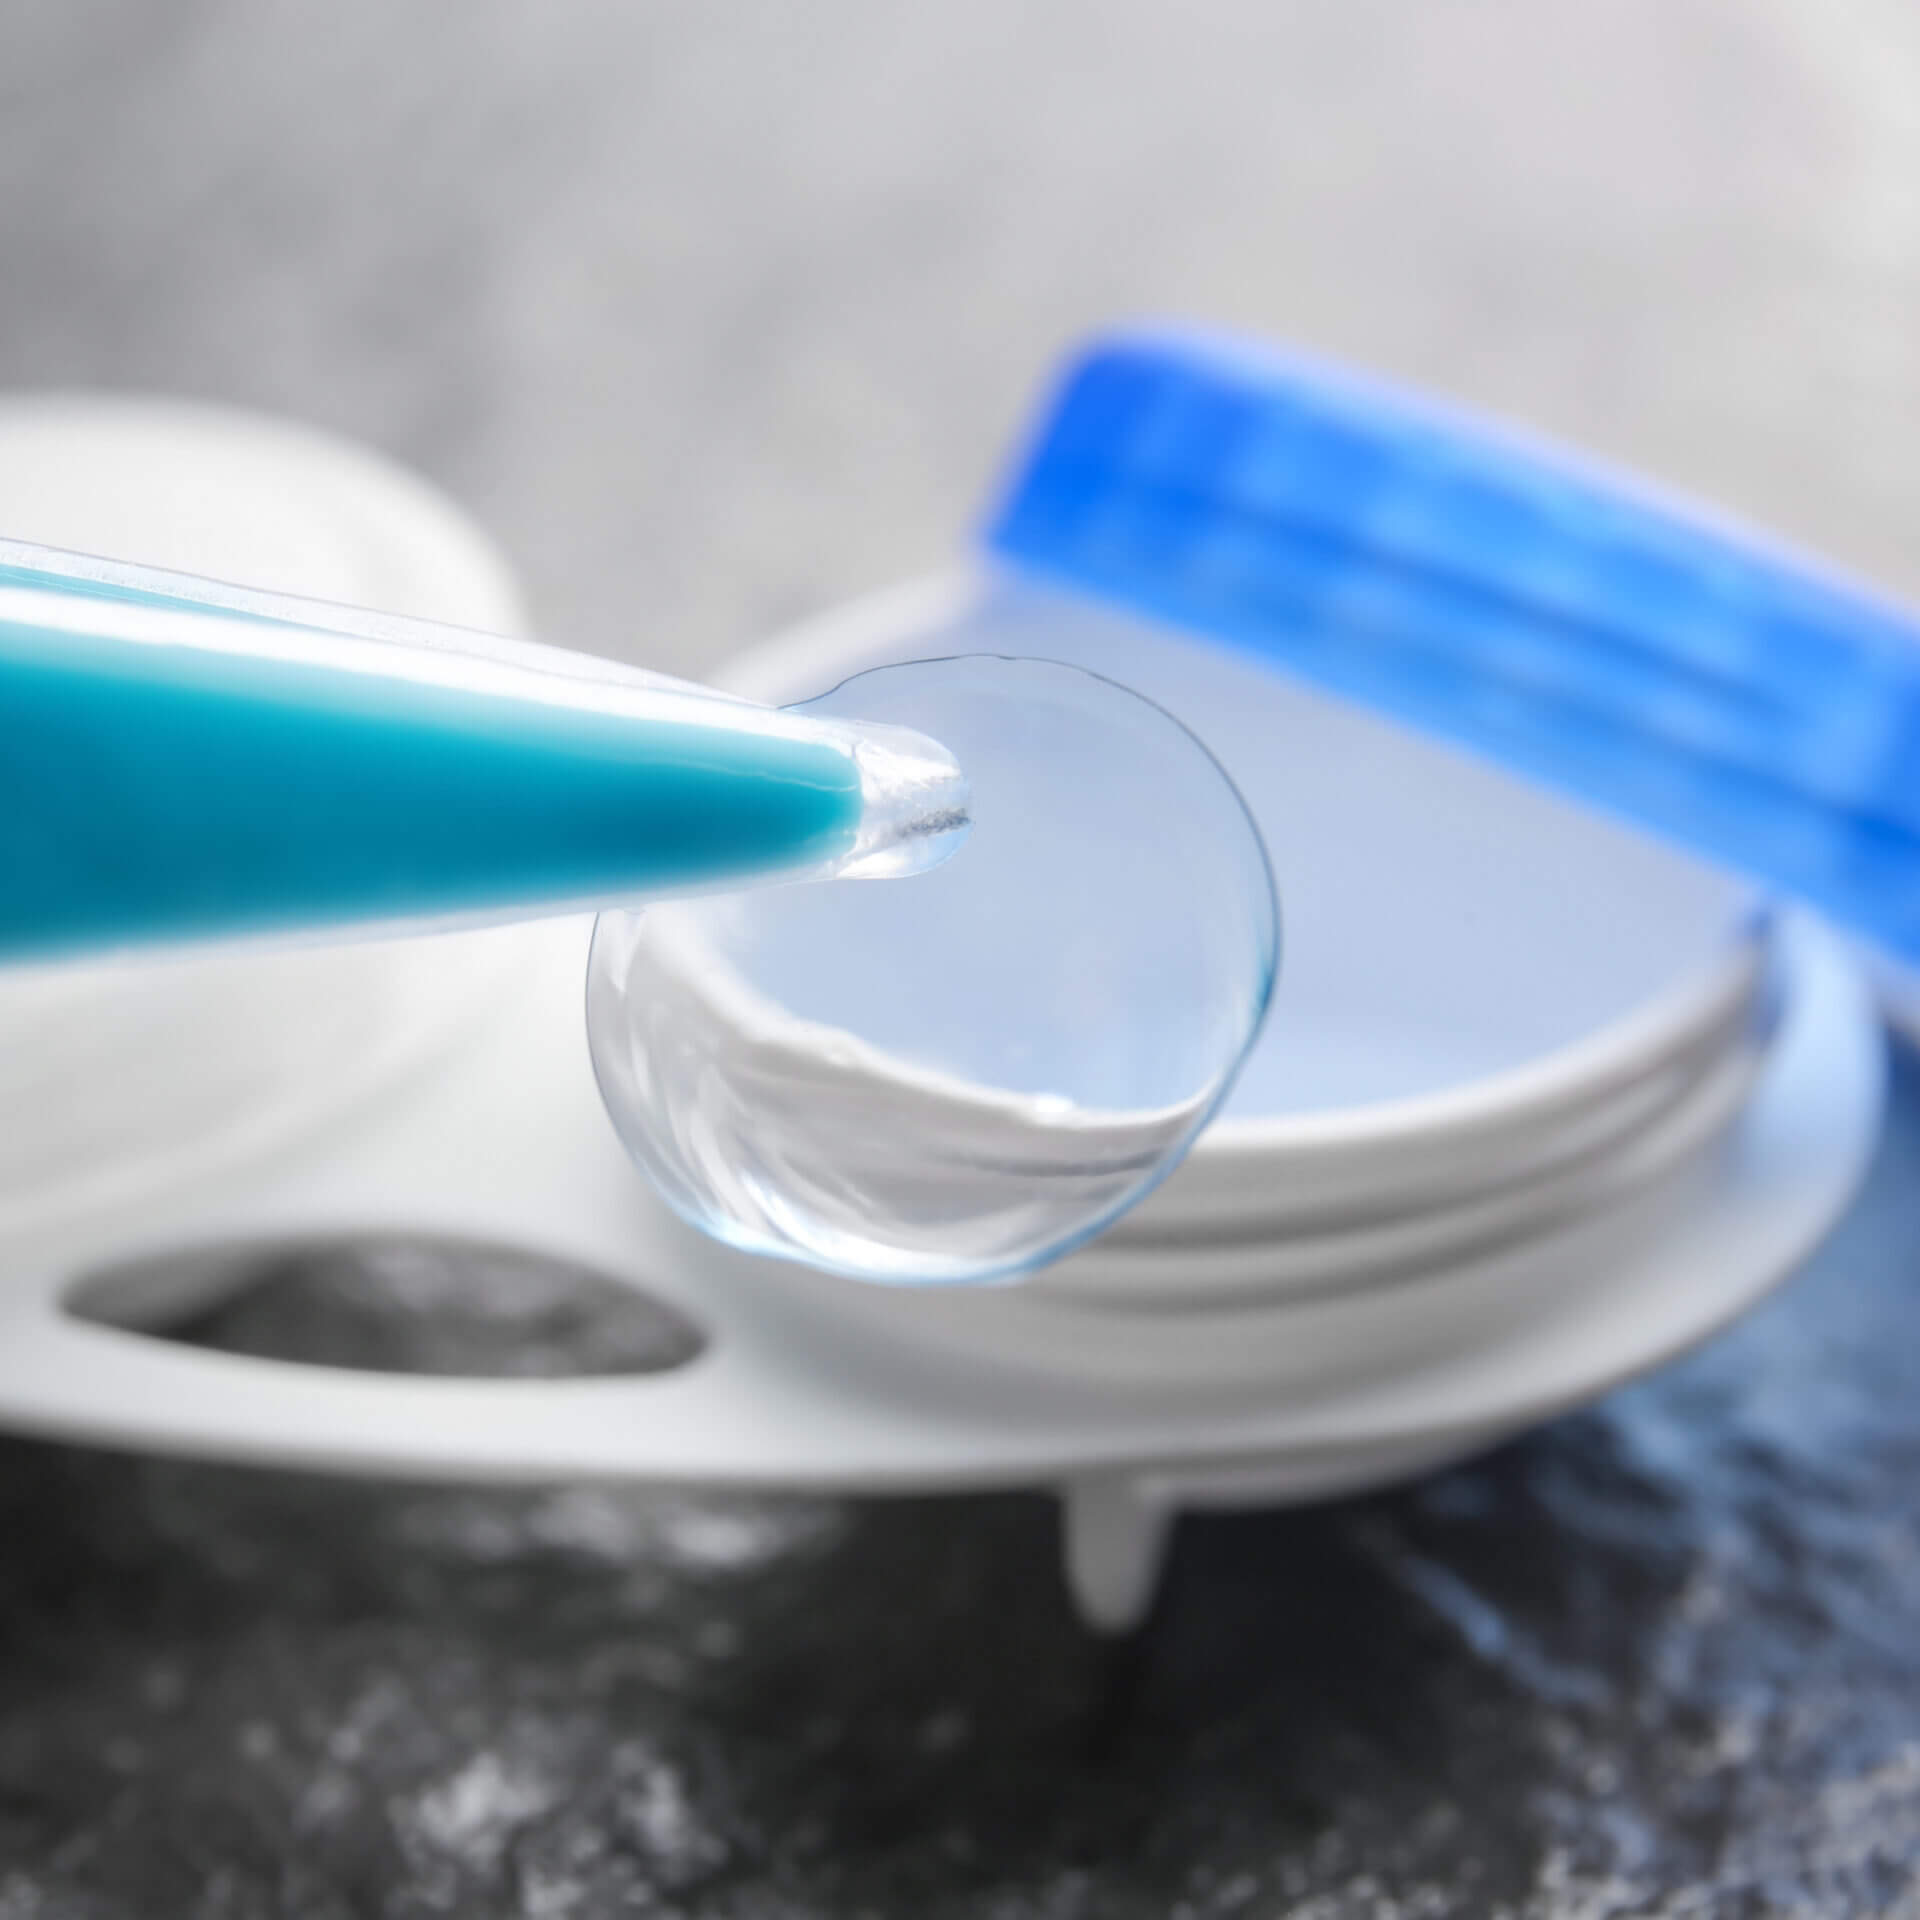 Caring for Overnight Contact Lenses